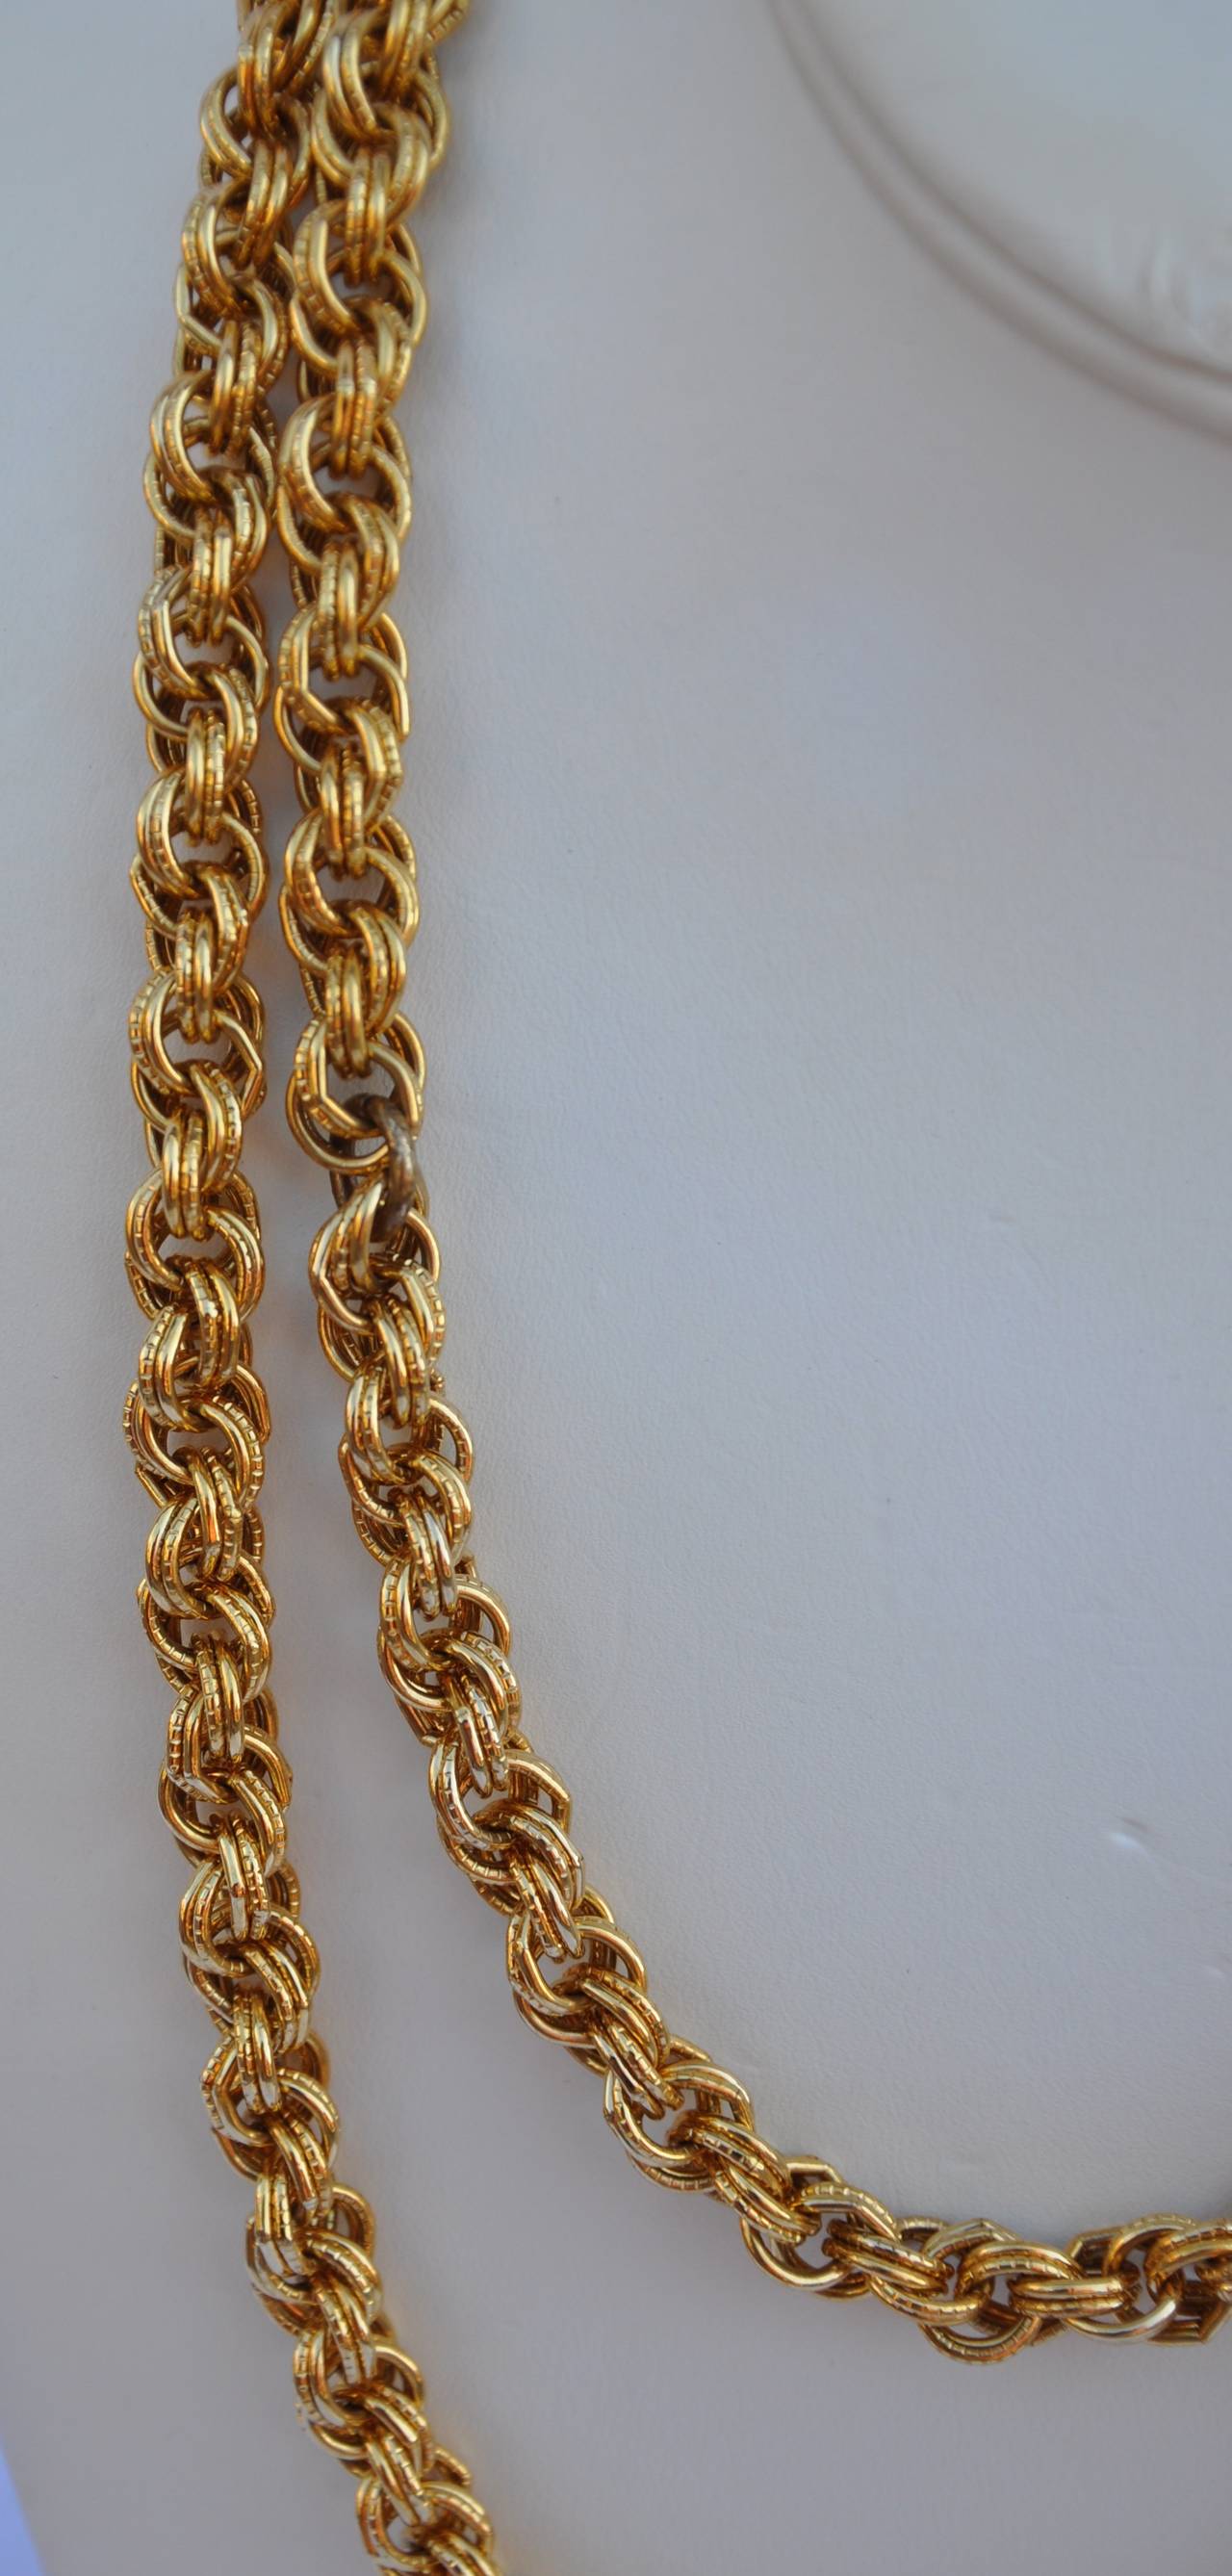 This wonderfully detailed multi-link gilded gold with vermeil finish gold necklace measures 45" in total length which can be worn as a single strand or as a double strand necklace. The width measures 3/8" in circumference.